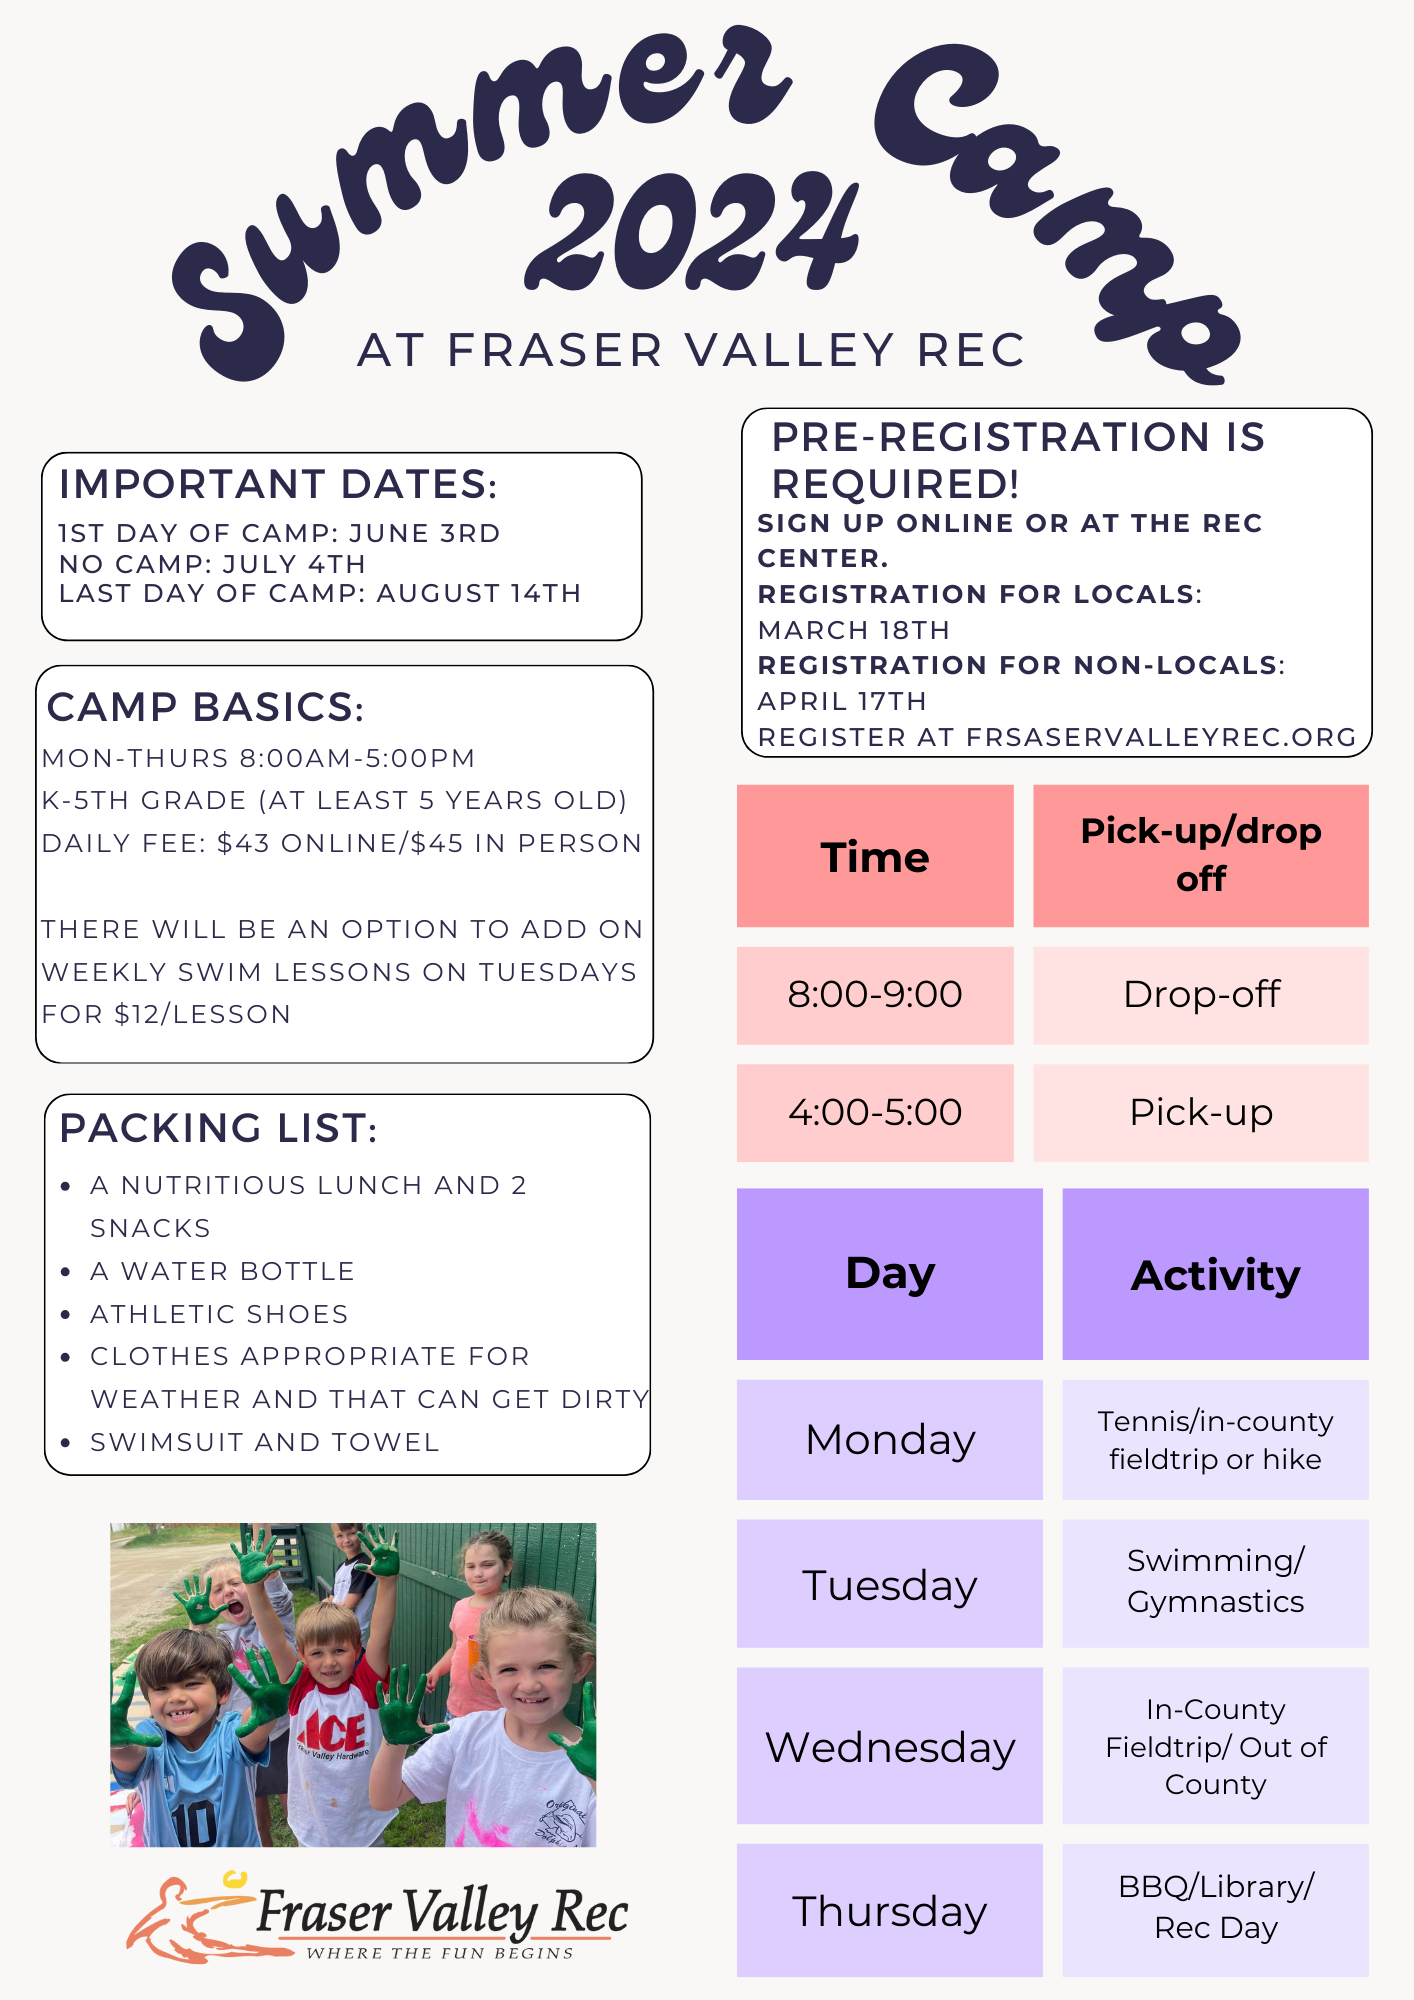 This is an informative flyer for Summer Camp 2024 at Fraser Valley Rec, which includes important dates, camp basics like the schedule for Monday to Thursday, the age group targeted, daily fees, and additional options for swim lessons. There's also a packing list provided. It details the pre-registration requirements for locals and non-locals, with specific times for drop-off and pick-up. The flyer outlines the weekly activities for each day and shows a photo of smiling children with painted hands at the bottom, alongside the Fraser Valley Rec logo.